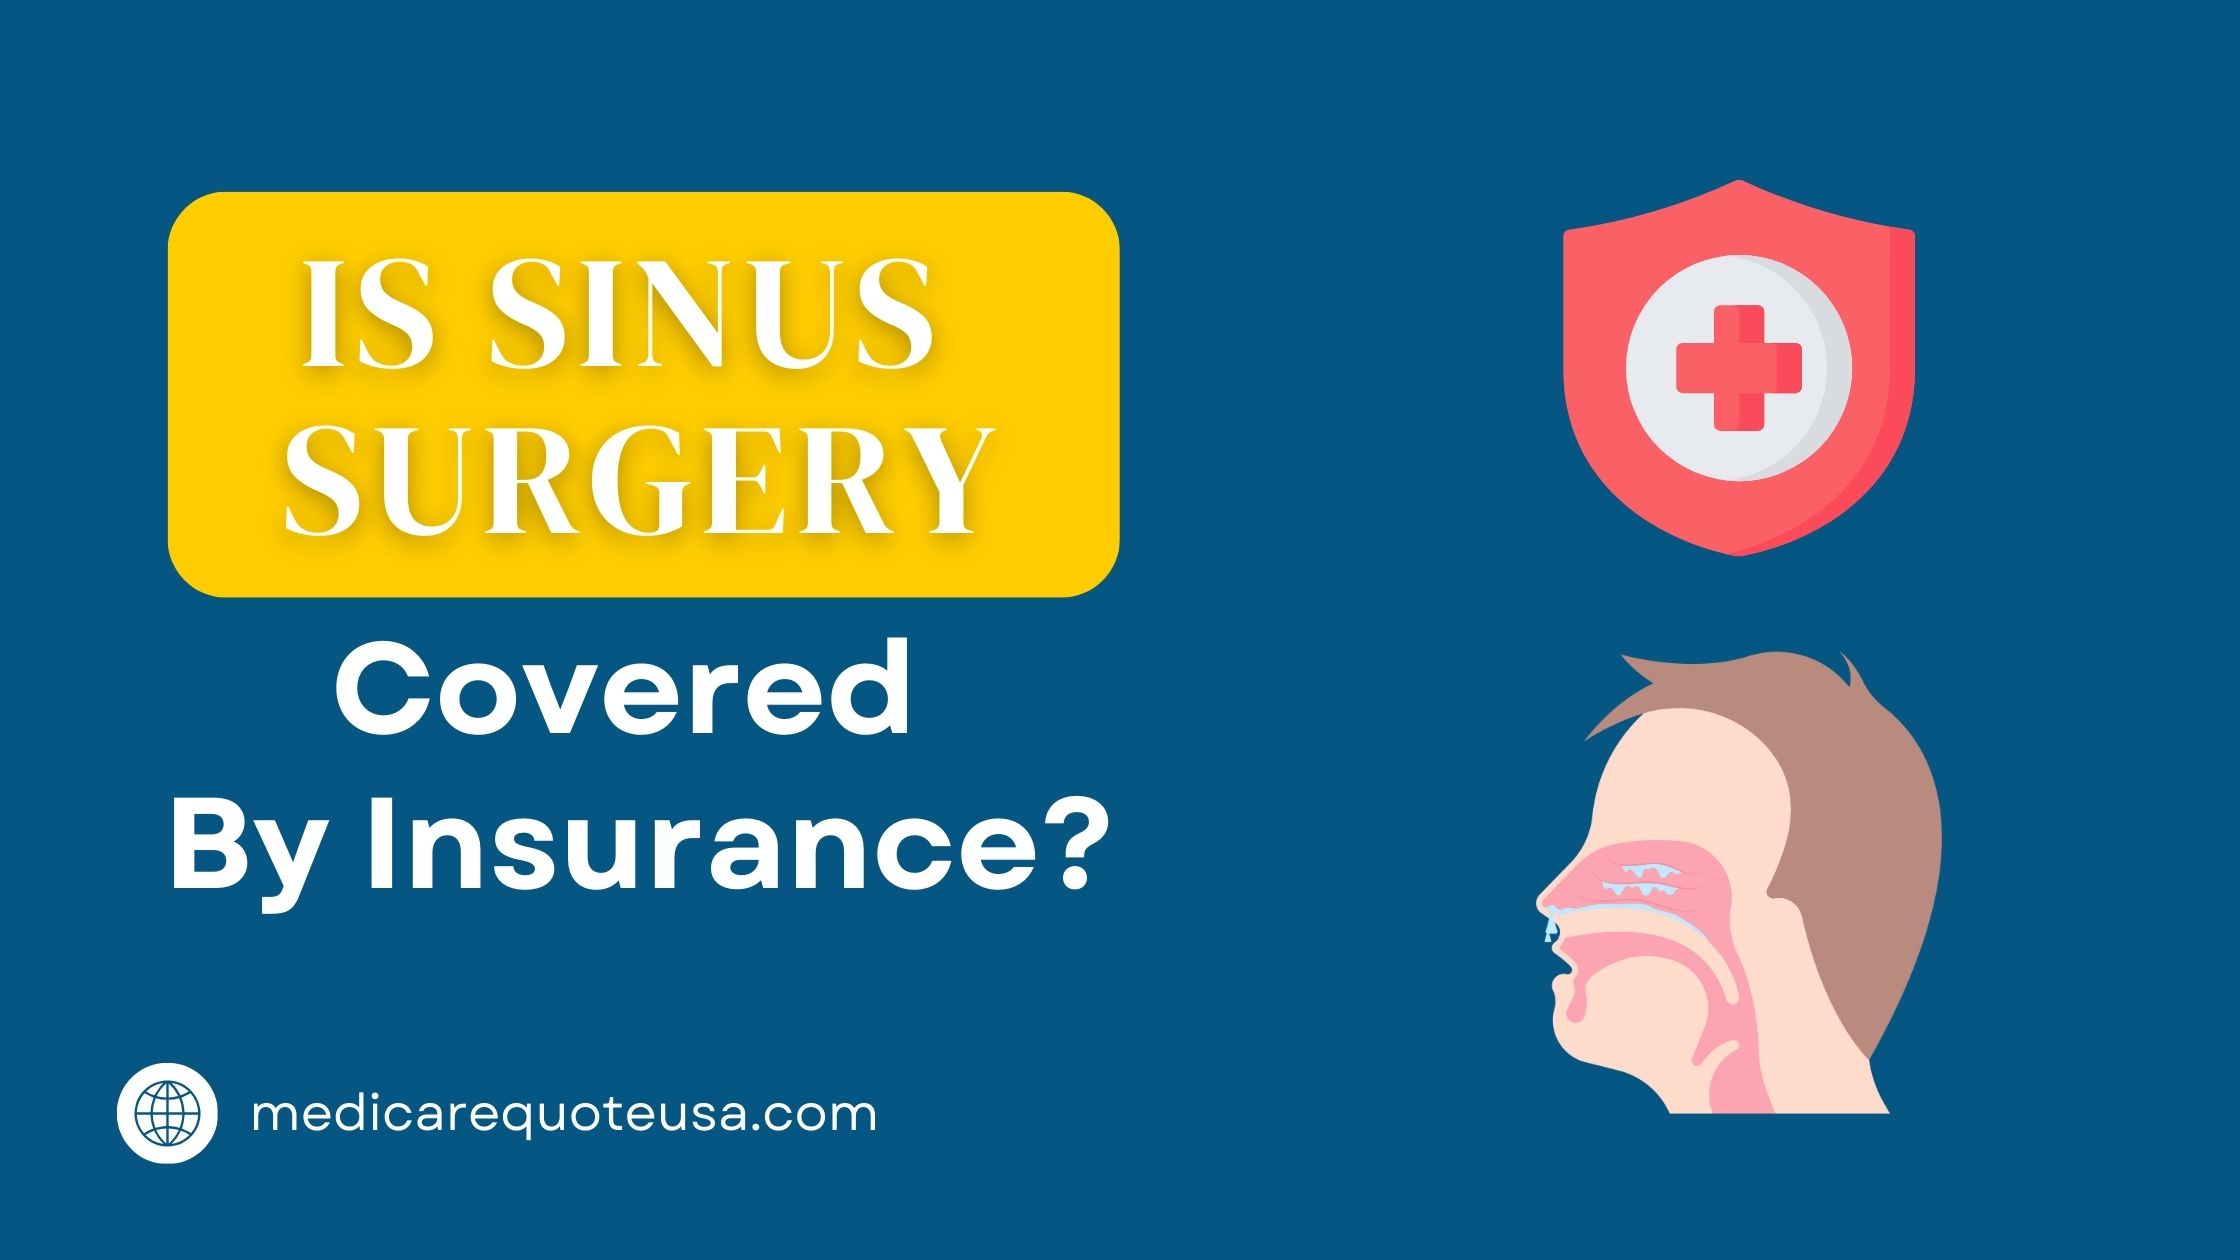 Is Sinus (Nasal) Surgery Covered by Insurance in USA